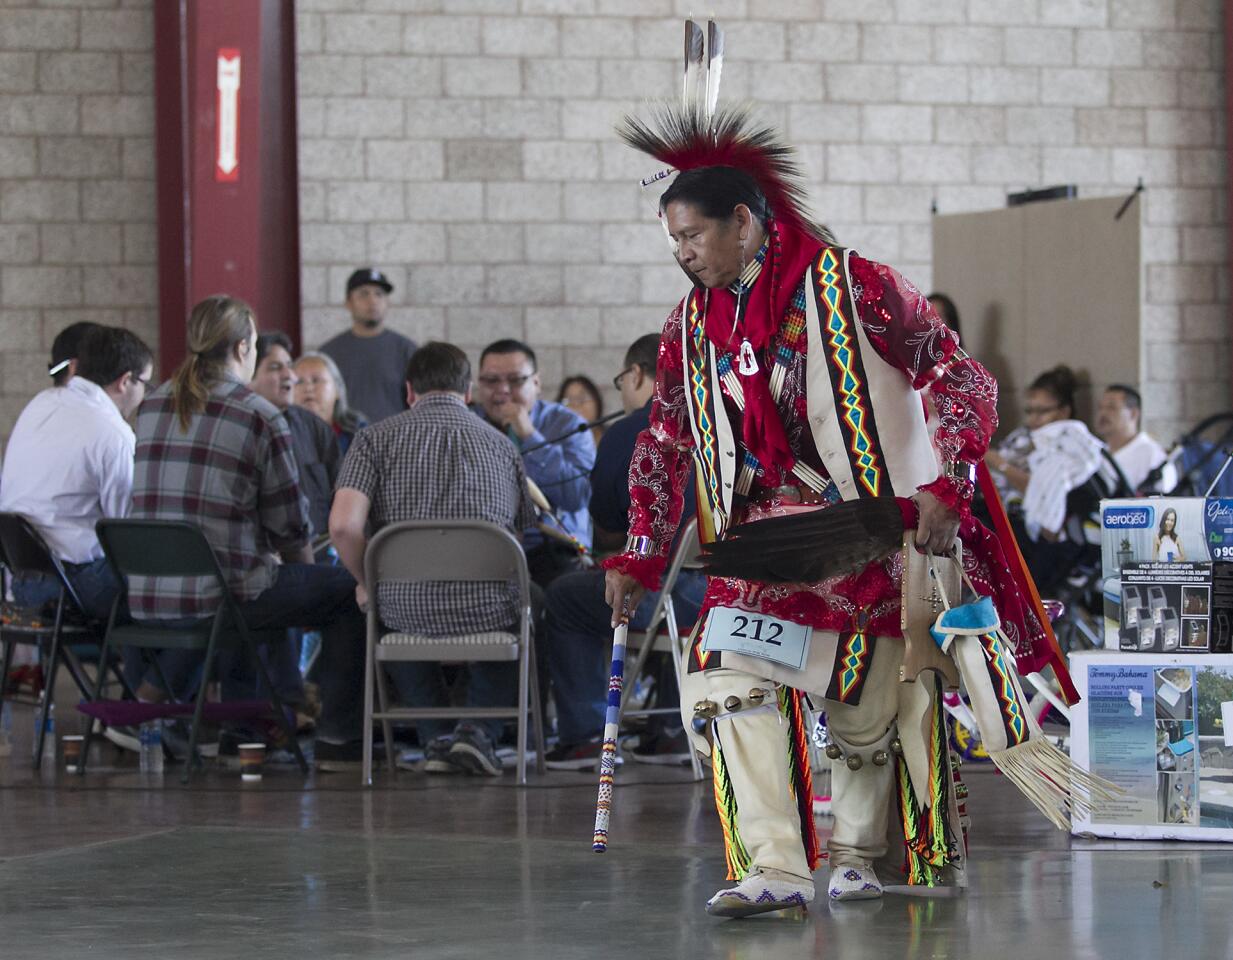 49th Annual Pow-Wow Brings Color and Tradition to OC